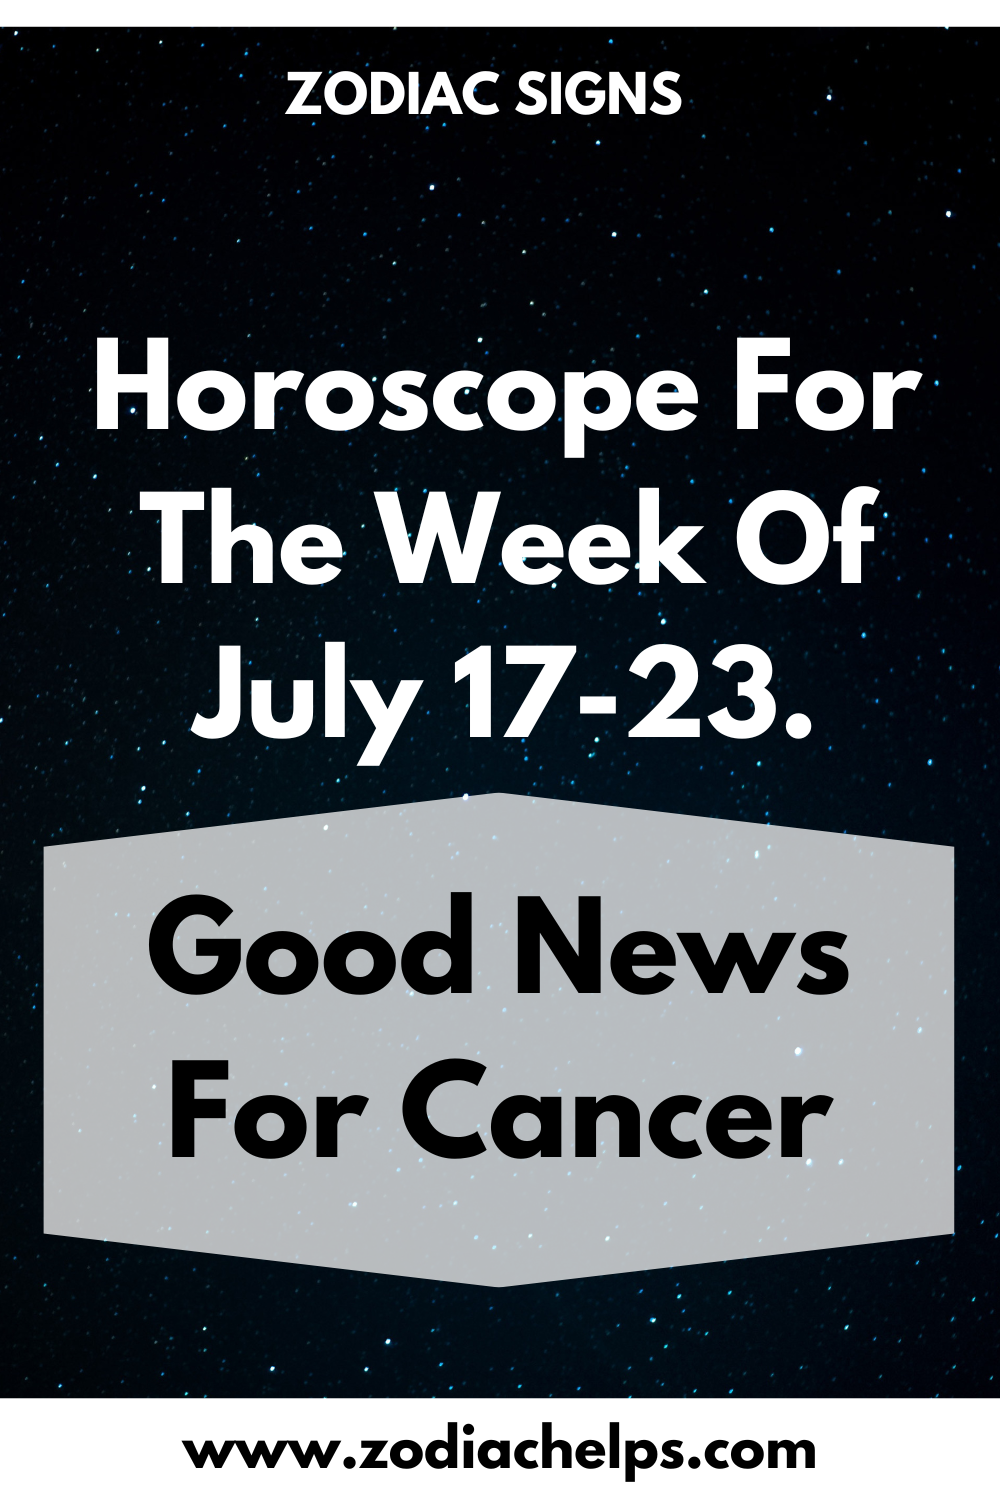 Horoscope For The Week Of July 17-23. Good News For Cancer